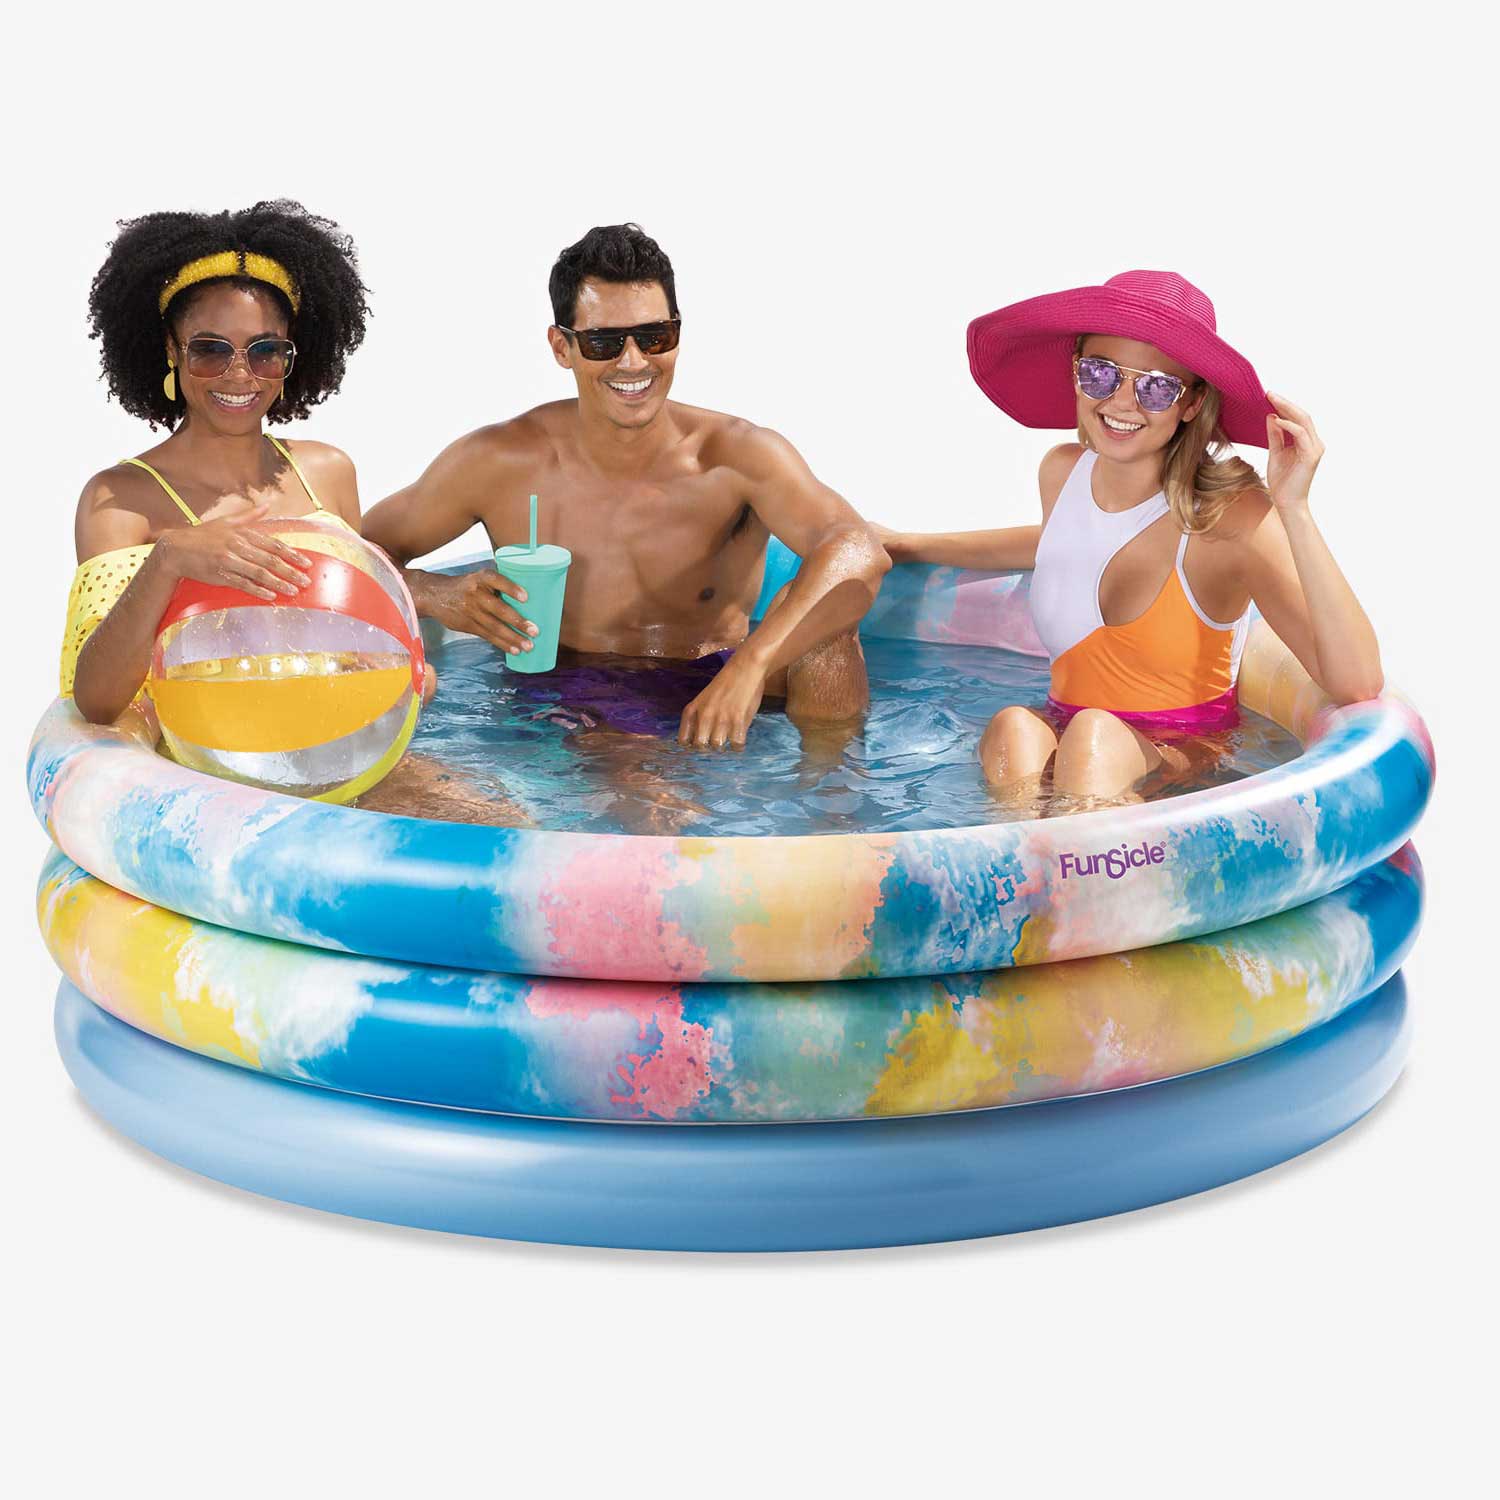 Funsicle Summer Vibes Pool with people inside